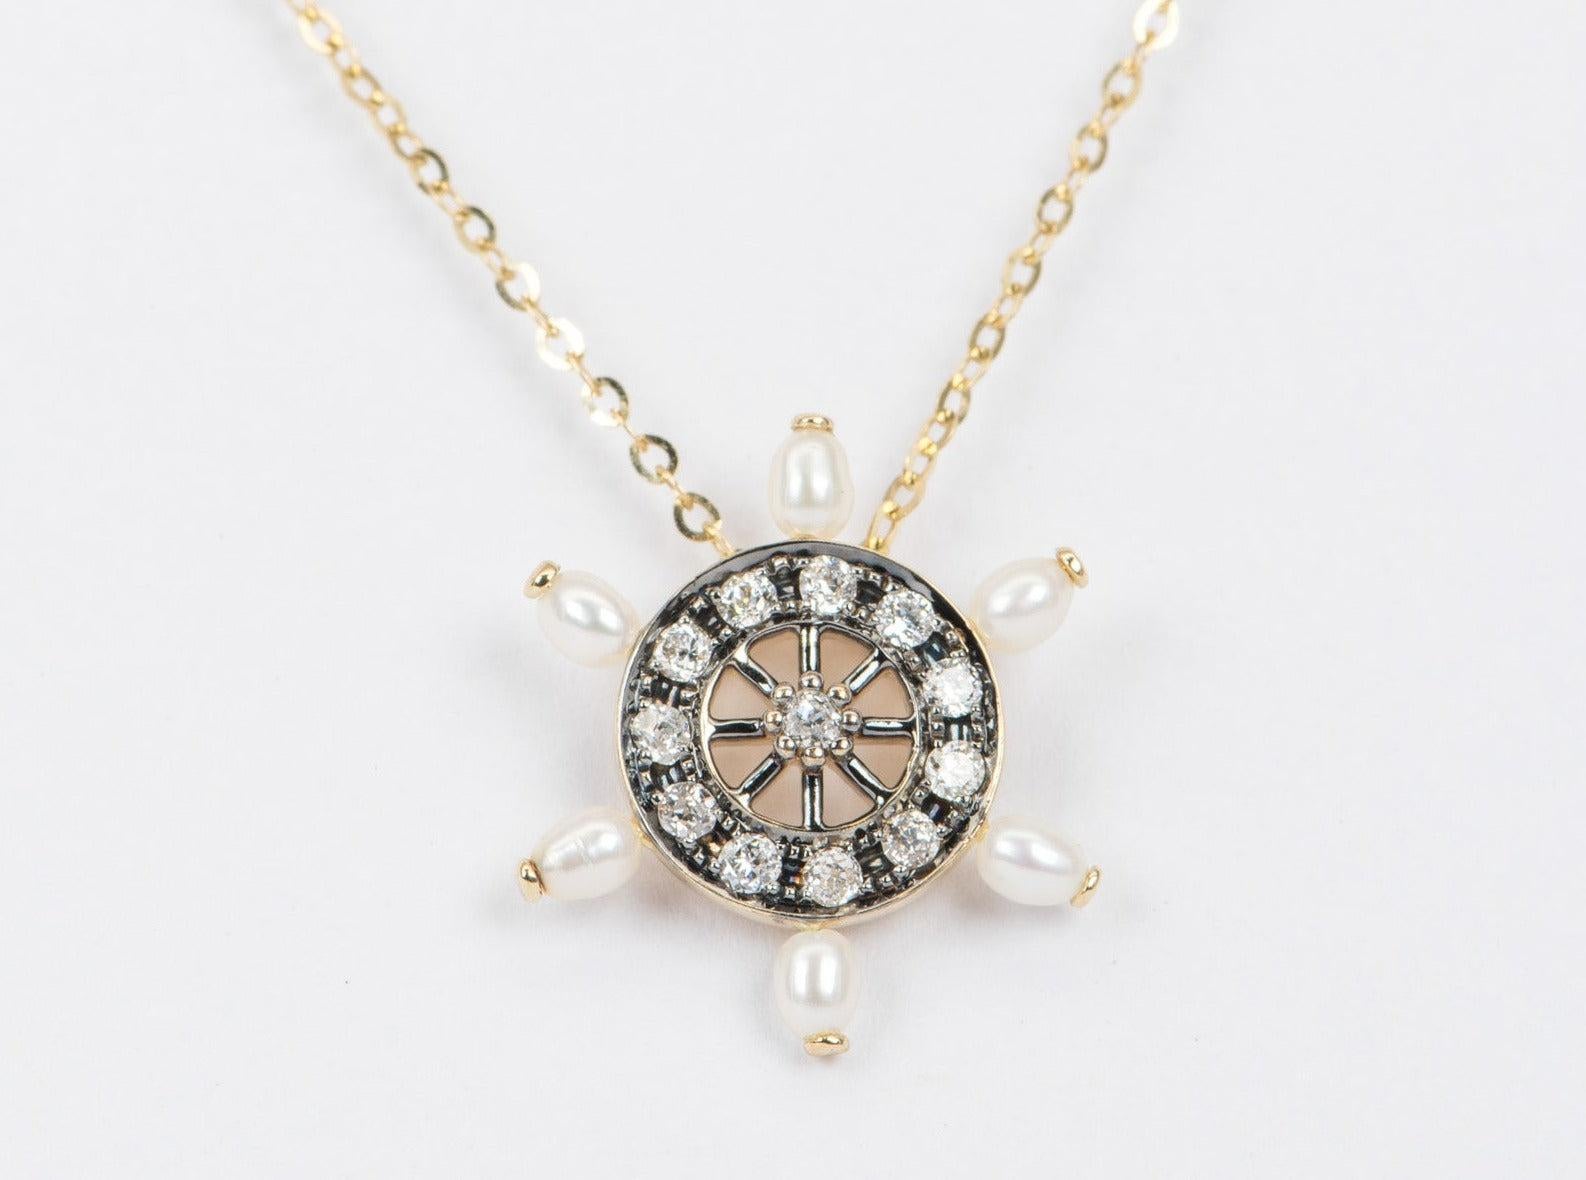 ♥ Solid 14k yellow gold vintage inspired pearl and diamond wheel pendant
♥ The item measures 19.8mm in length, 17.5mm in width, and 13.2mm in height.

♥ Note: The necklace chain is sold separately. You can purchase the solid 14K gold chain as an